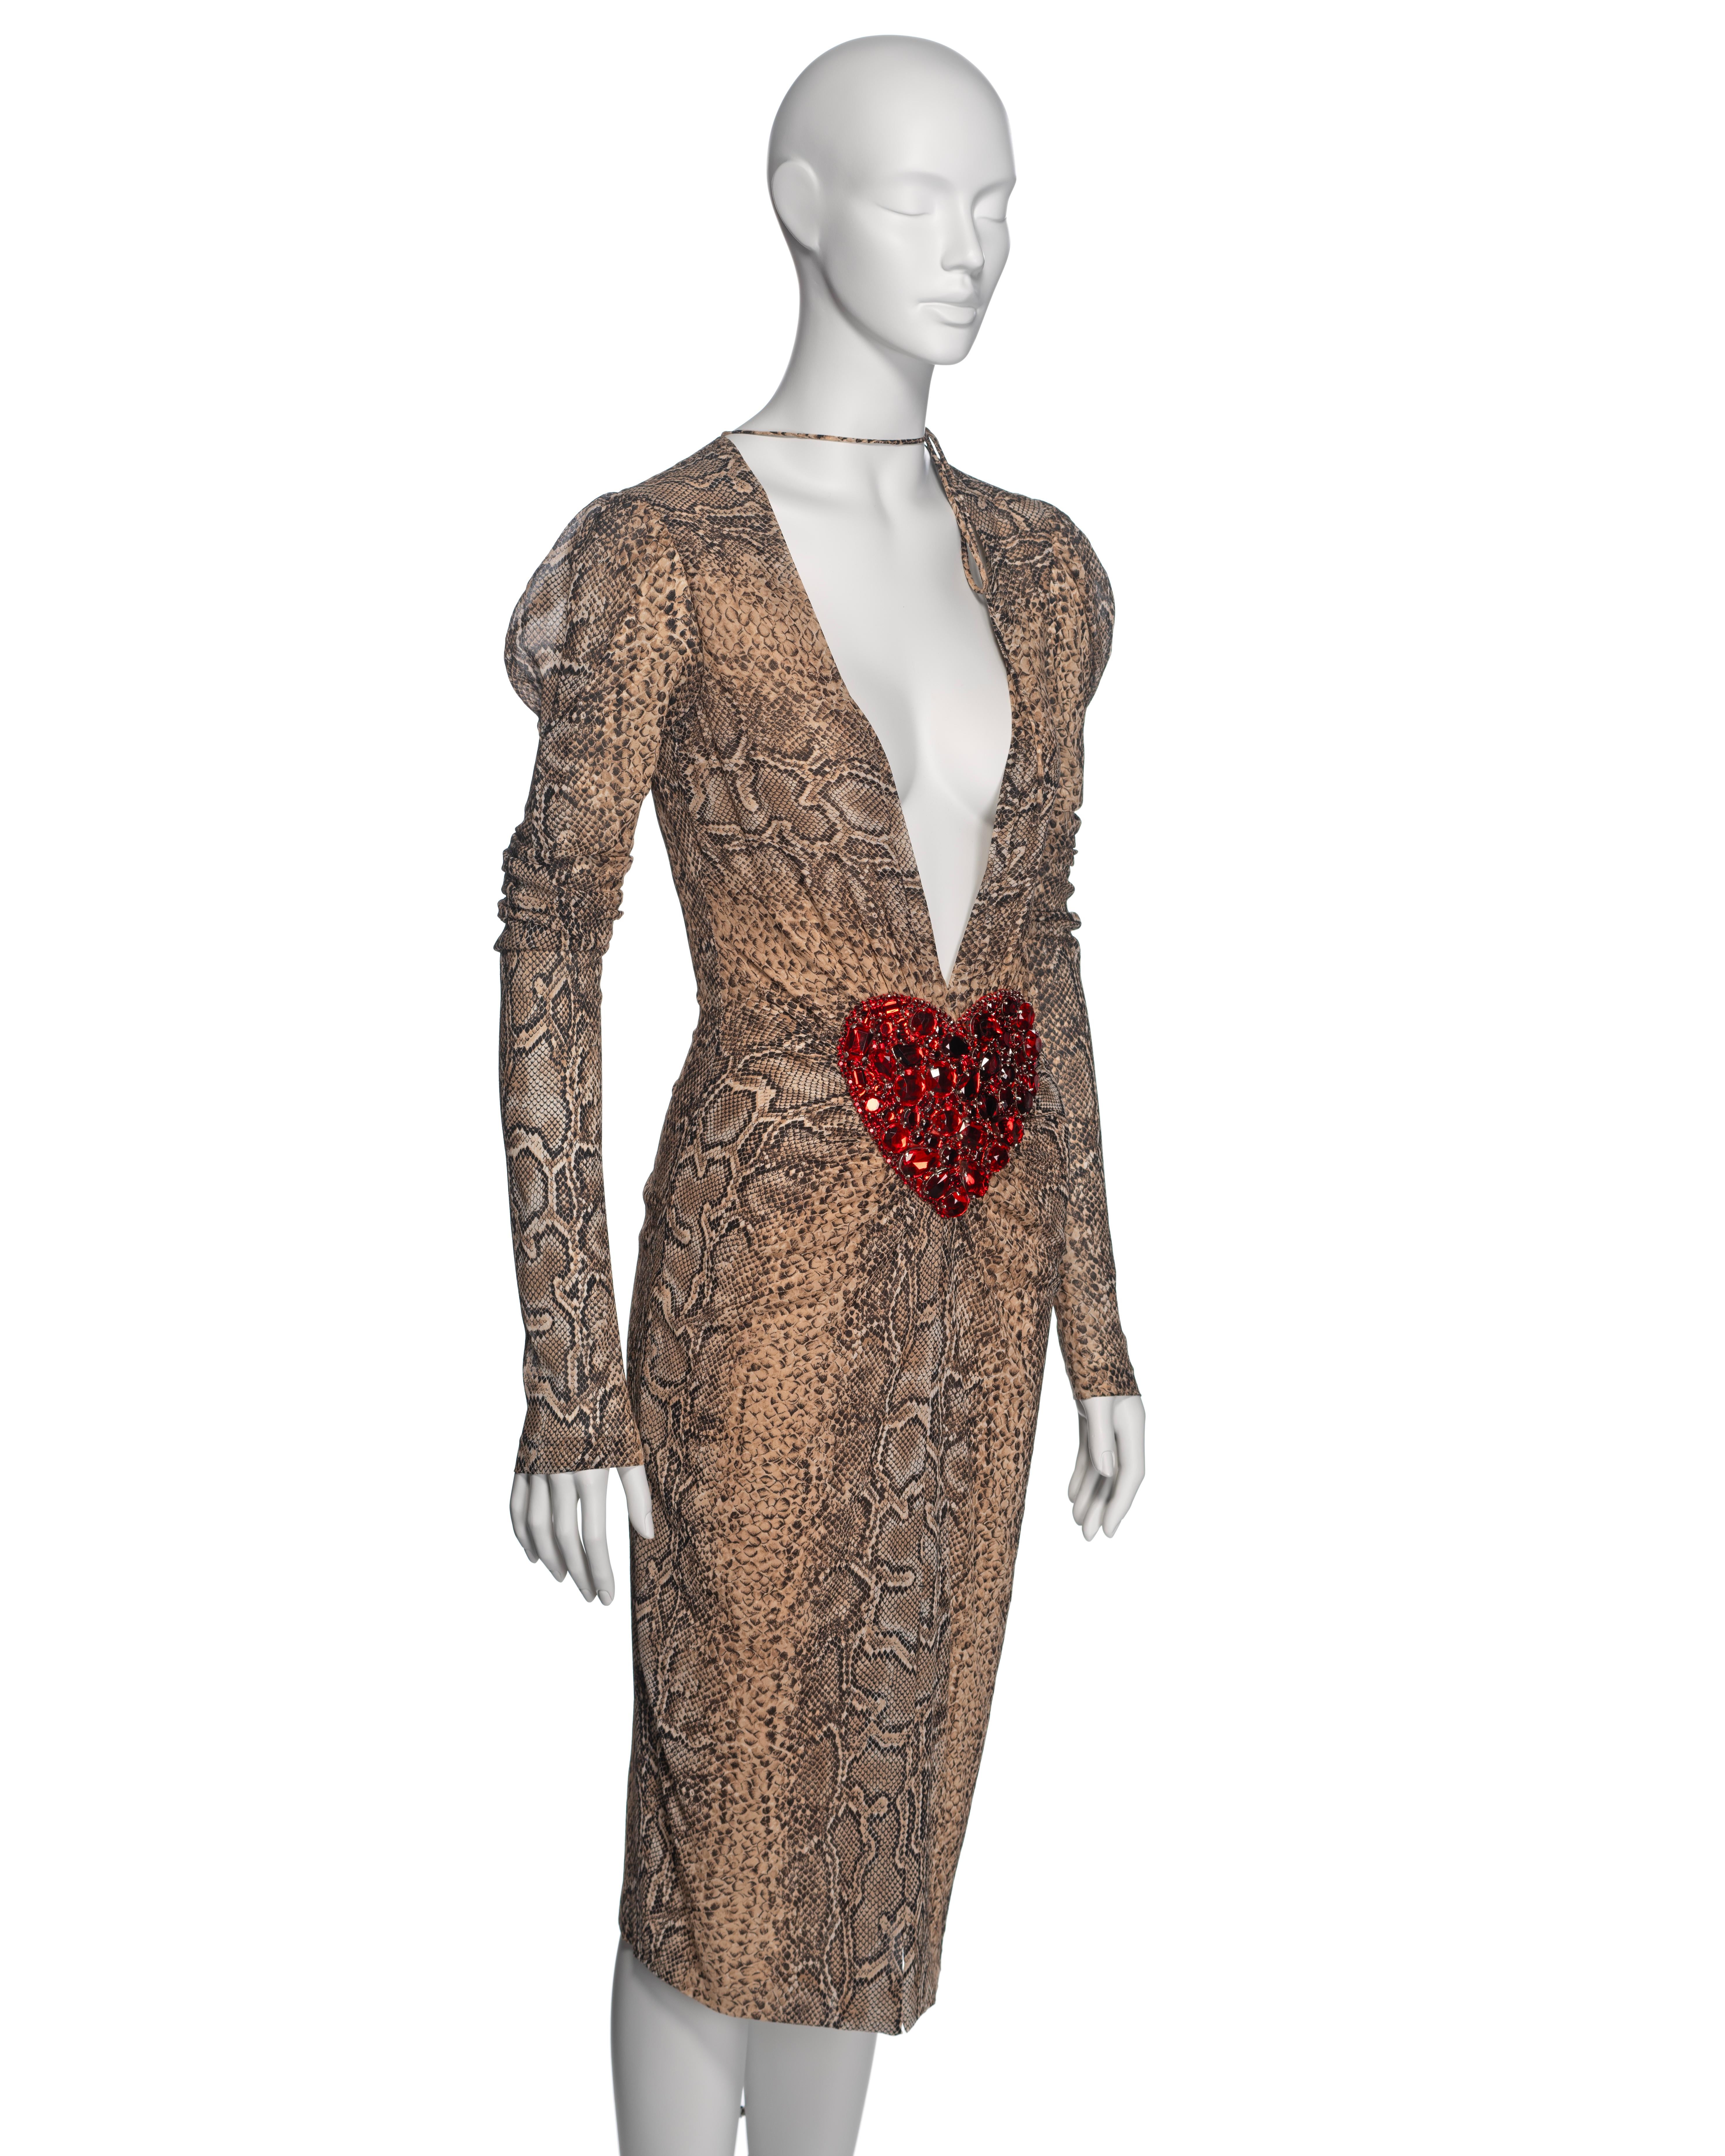 Dolce & Gabbana Snakeskin Print Low Plunge Dress with Crystal Heart, SS 2005 For Sale 4